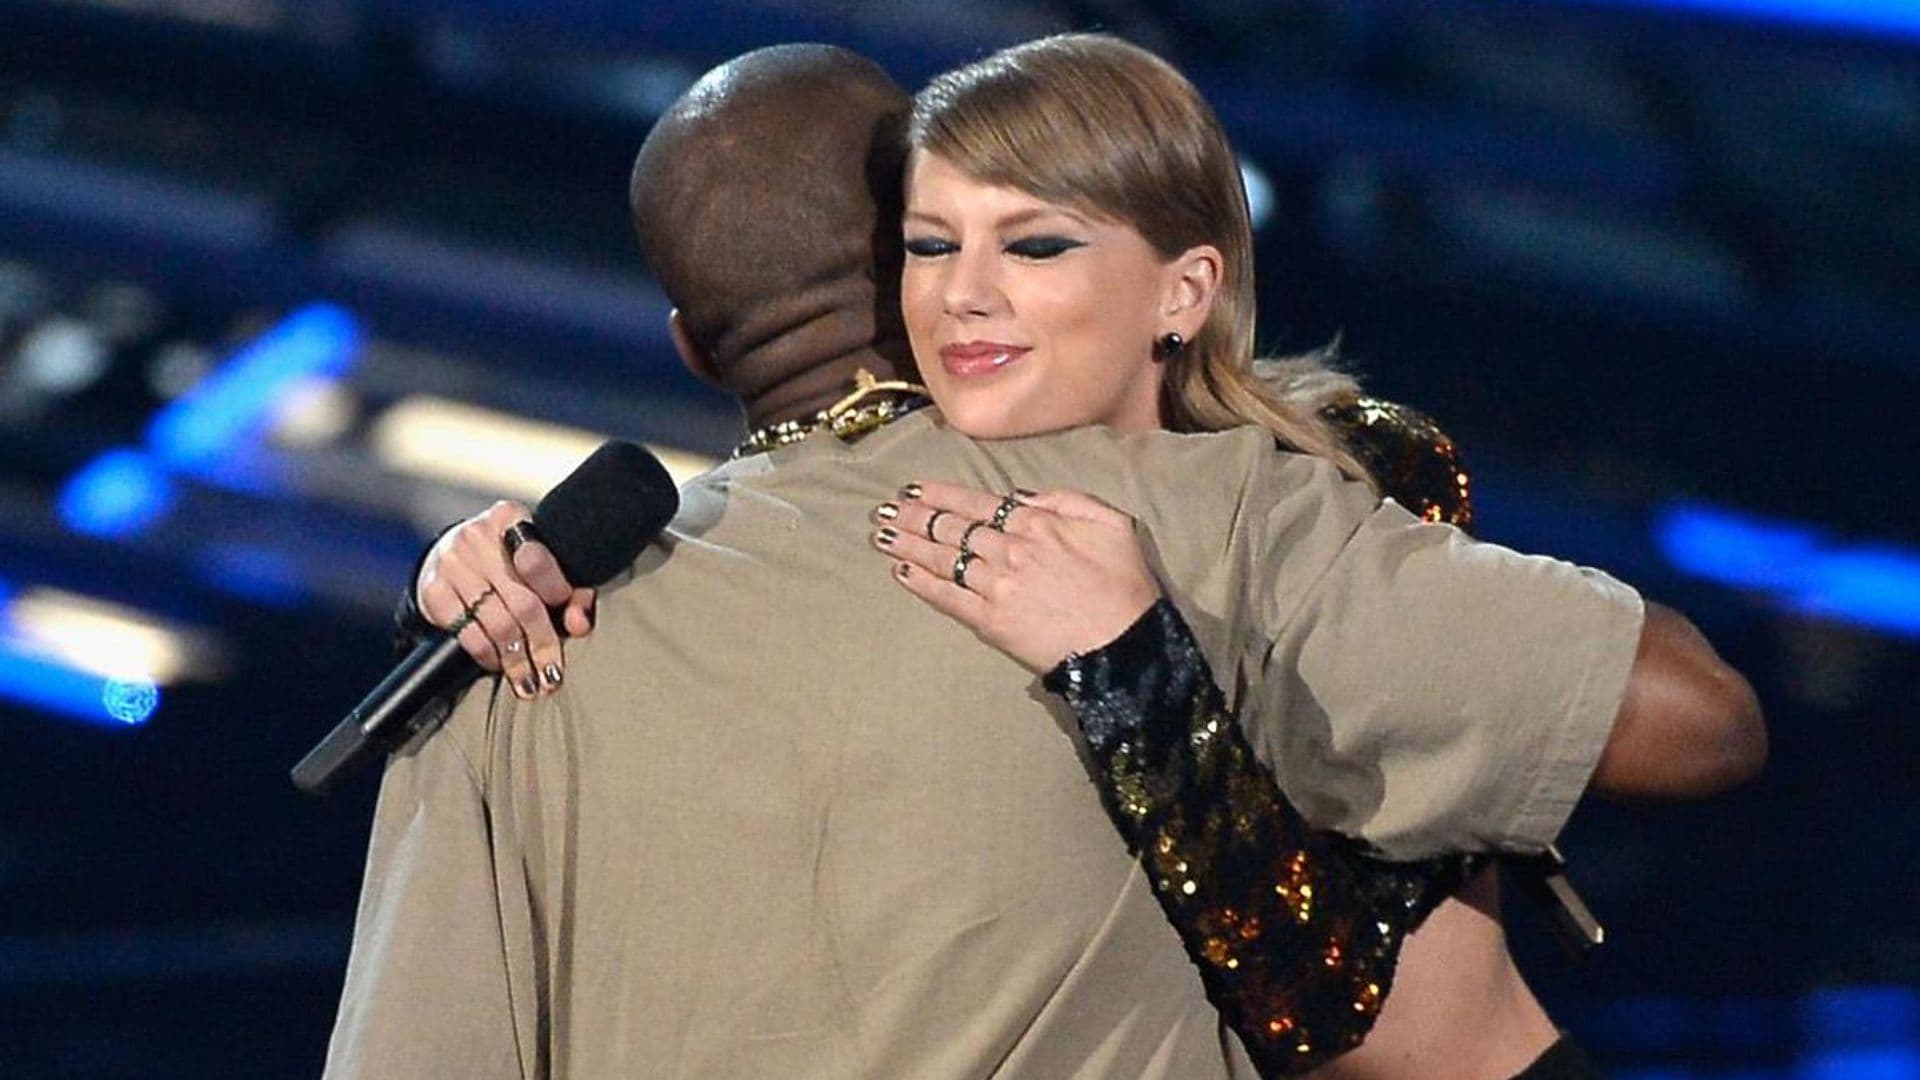 Kanye West wants to change the music industry and help Taylor Swift and Jay-Z